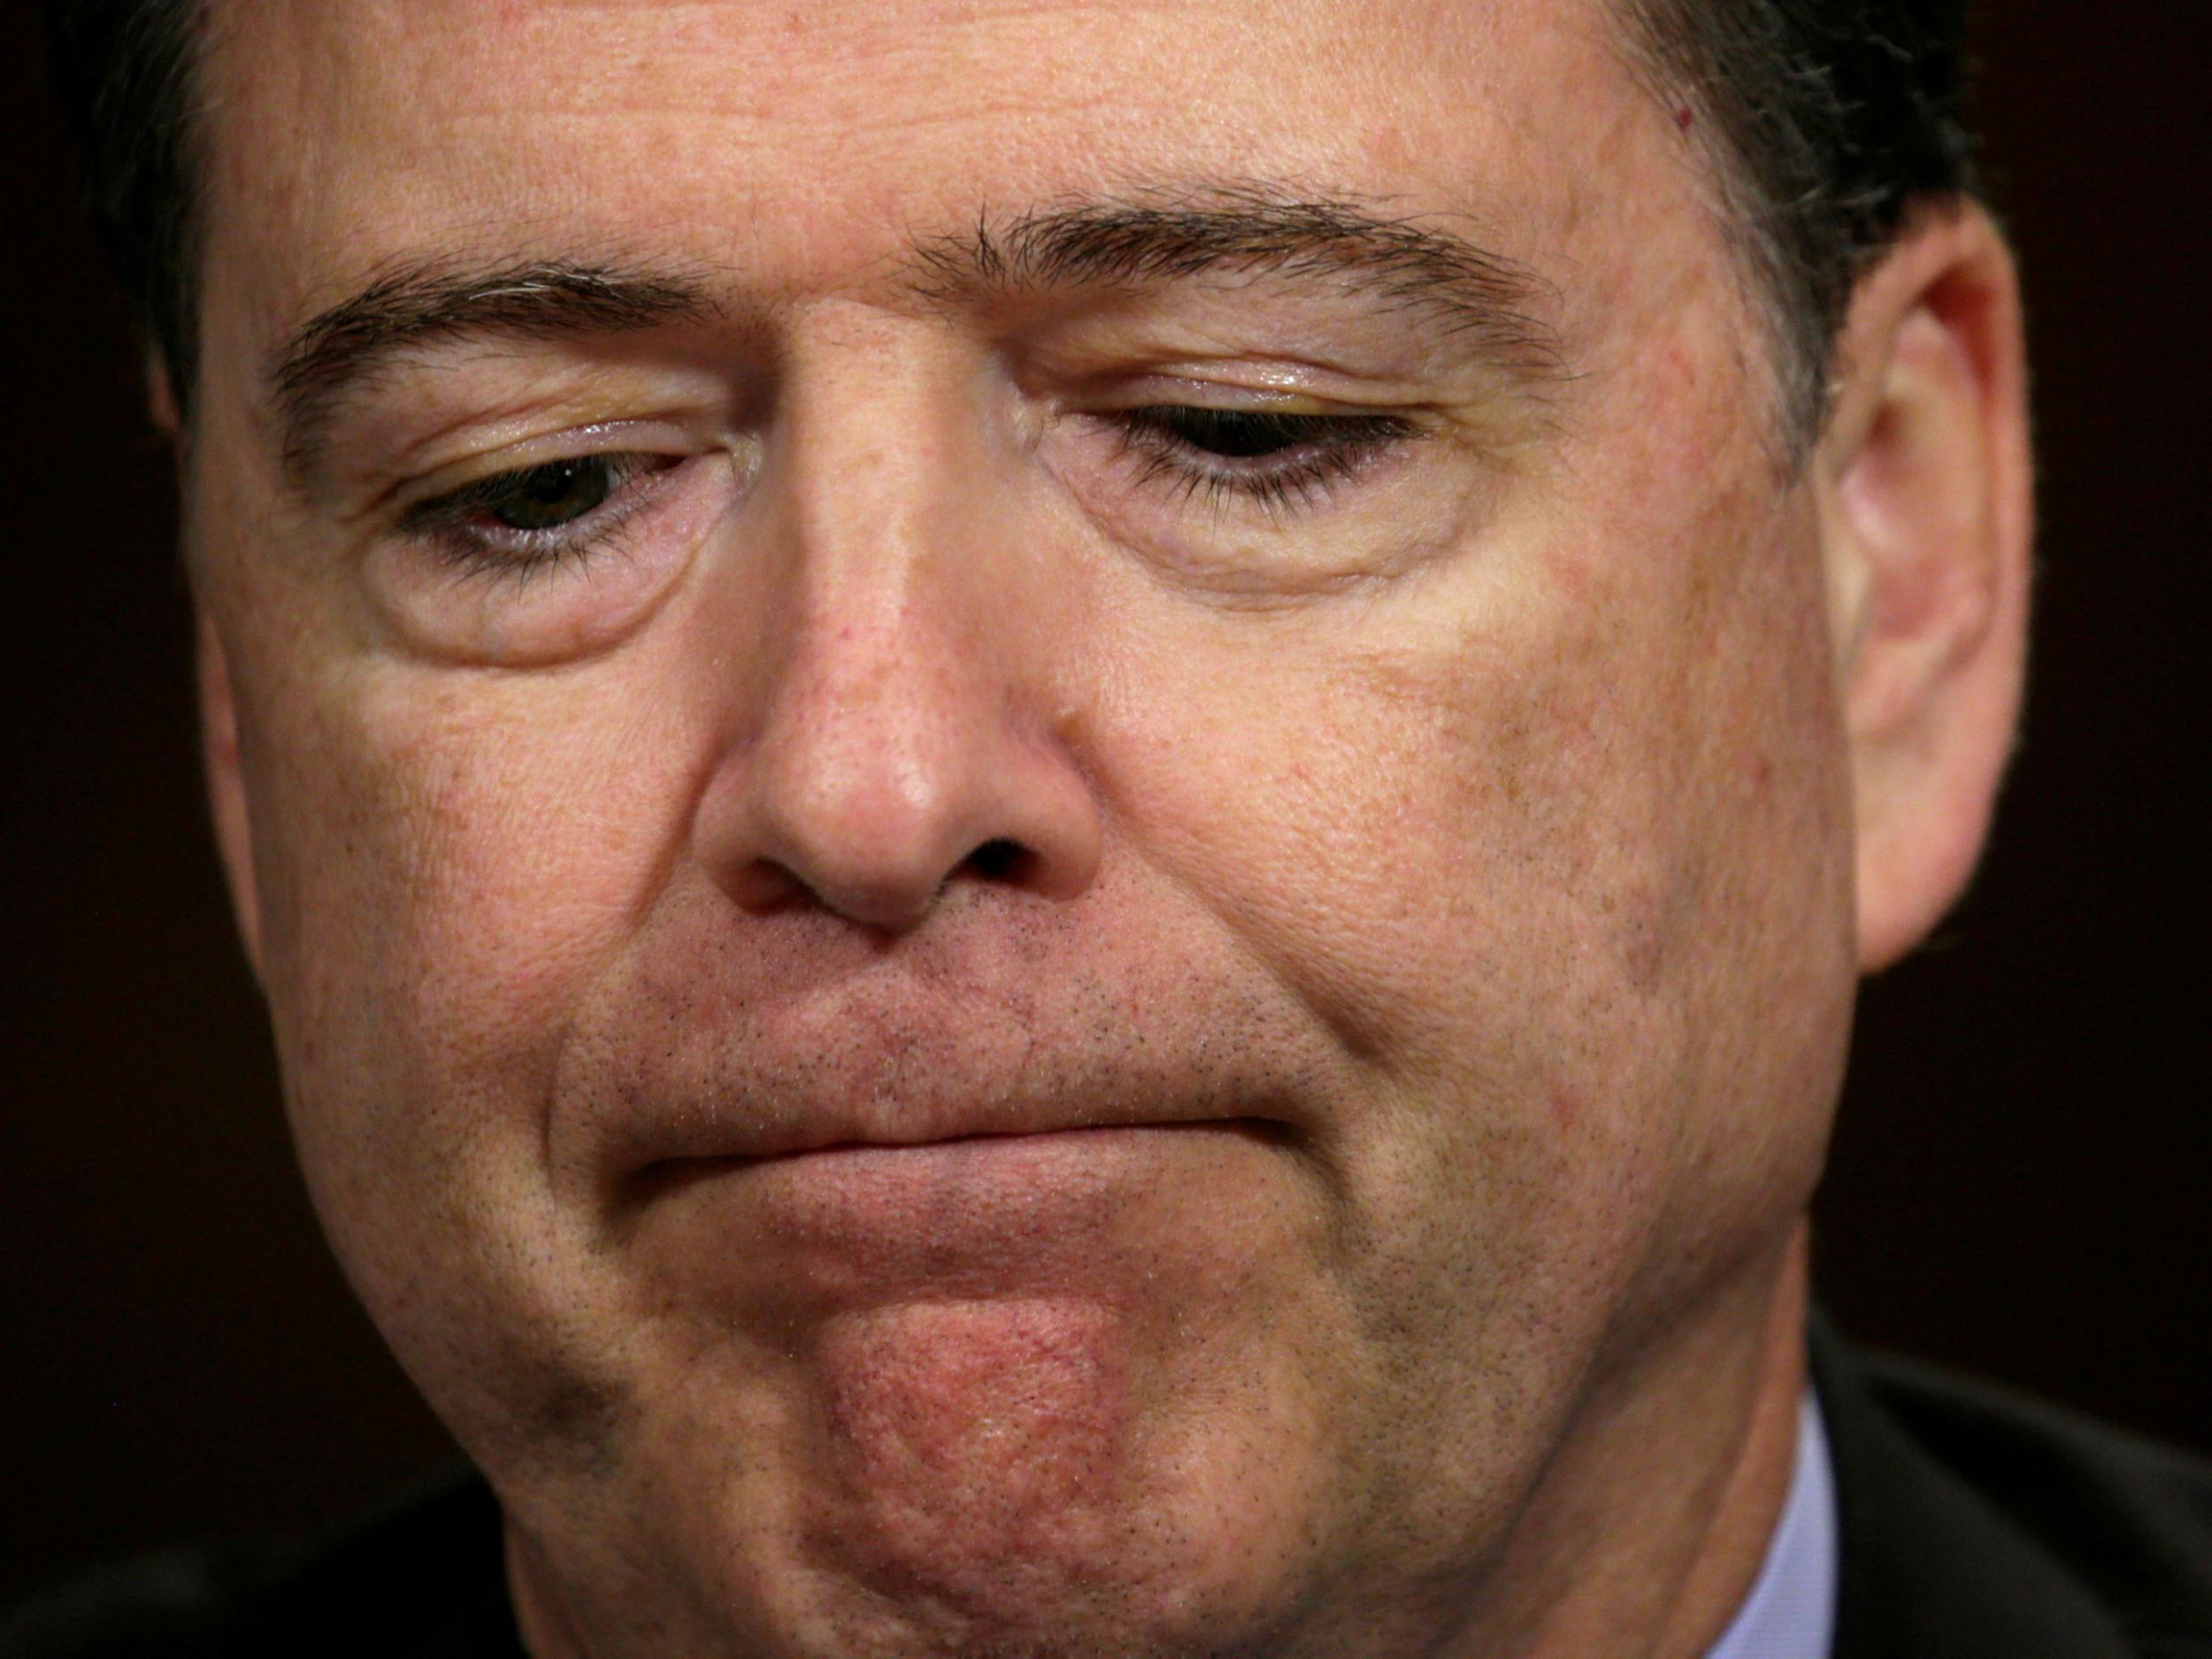 At the time the lawyers were writing, Comey faced heavy criticism from Democrats